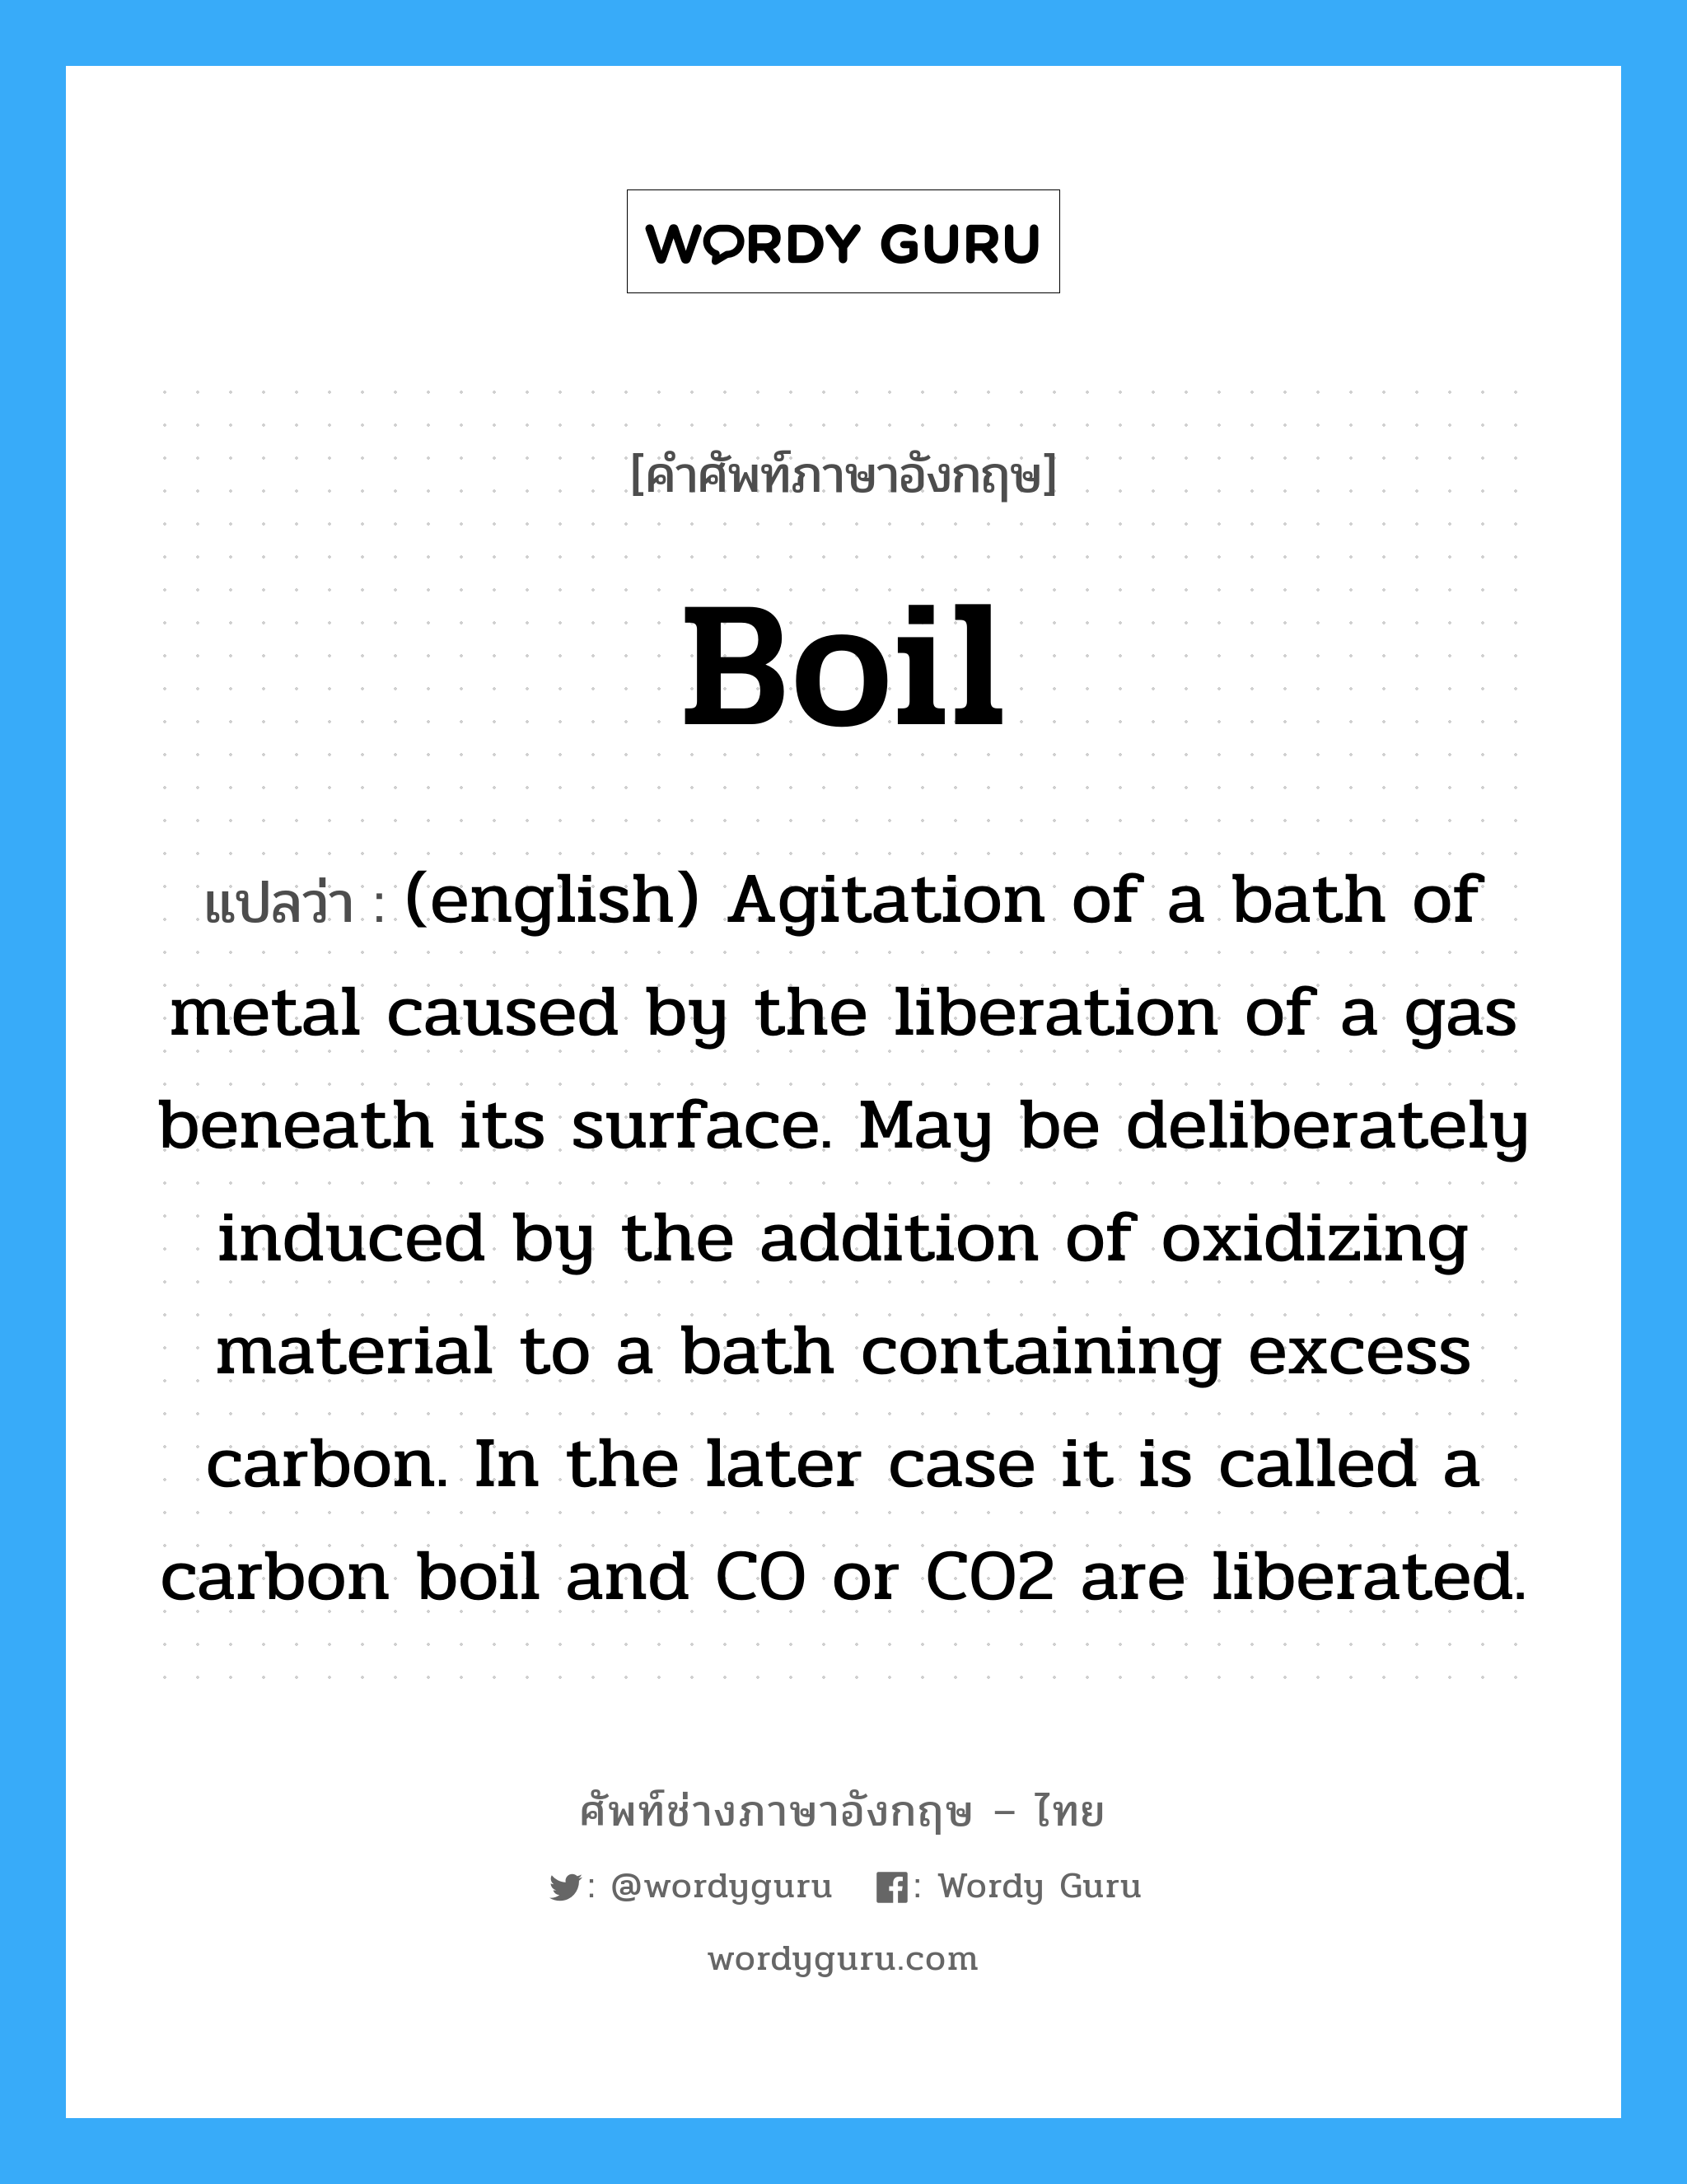 (english) Agitation of a bath of metal caused by the liberation of a gas beneath its surface. May be deliberately induced by the addition of oxidizing material to a bath containing excess carbon. In the later case it is called a carbon boil and CO or CO2 are liberated. ภาษาอังกฤษ?, คำศัพท์ช่างภาษาอังกฤษ - ไทย (english) Agitation of a bath of metal caused by the liberation of a gas beneath its surface. May be deliberately induced by the addition of oxidizing material to a bath containing excess carbon. In the later case it is called a carbon boil and CO or CO2 are liberated. คำศัพท์ภาษาอังกฤษ (english) Agitation of a bath of metal caused by the liberation of a gas beneath its surface. May be deliberately induced by the addition of oxidizing material to a bath containing excess carbon. In the later case it is called a carbon boil and CO or CO2 are liberated. แปลว่า Boil